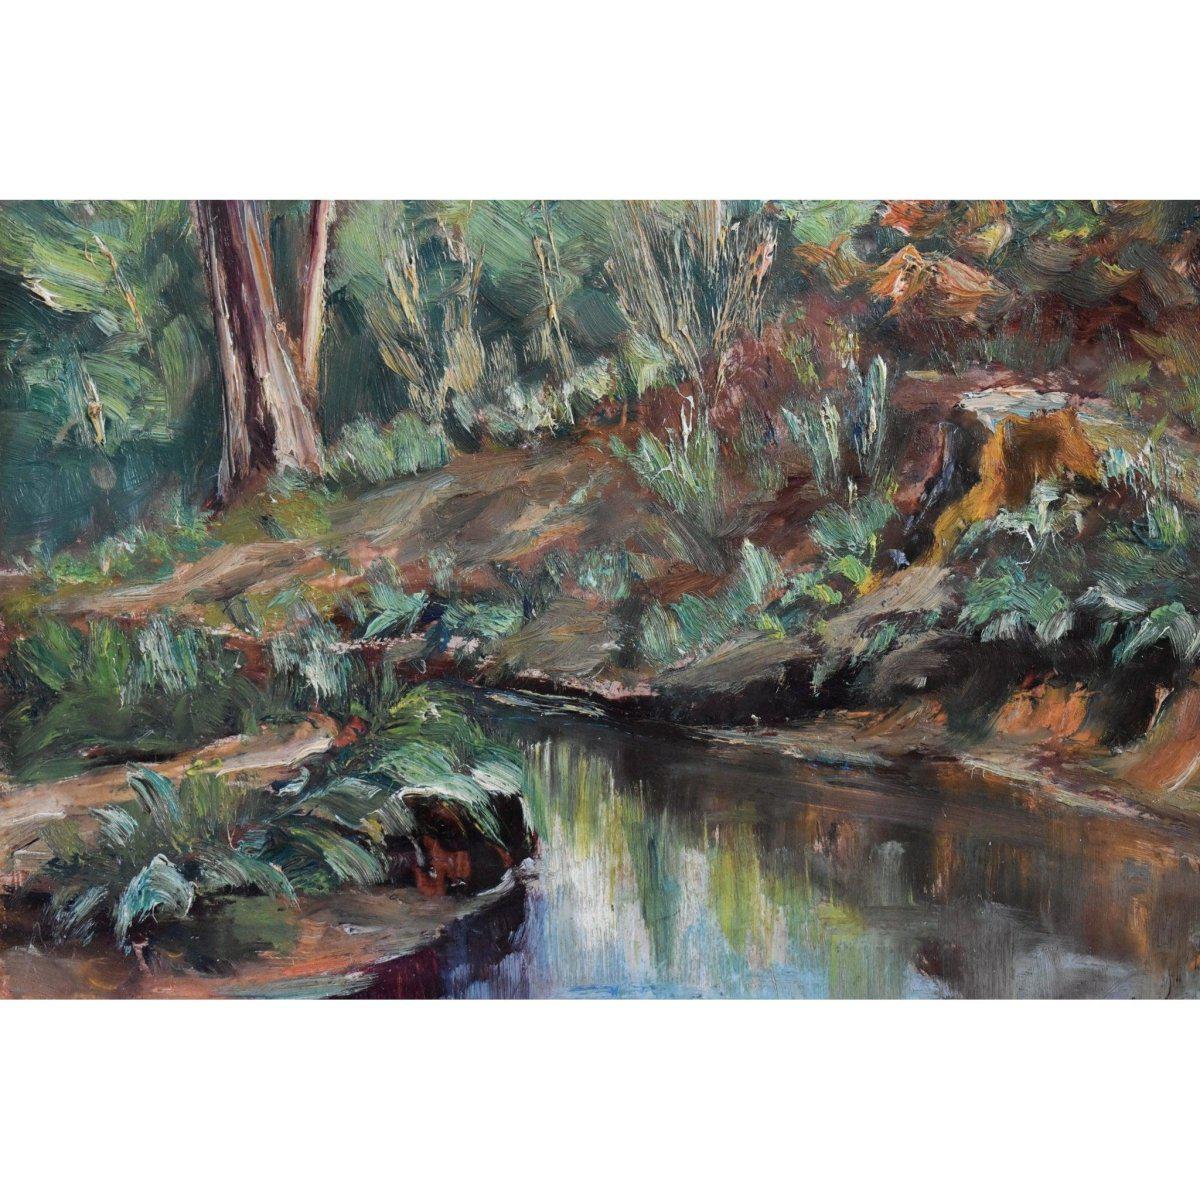 Vintage landscape oil painting forest stream French expressionist art circa 1950 for sale at Winckelmann Gallery